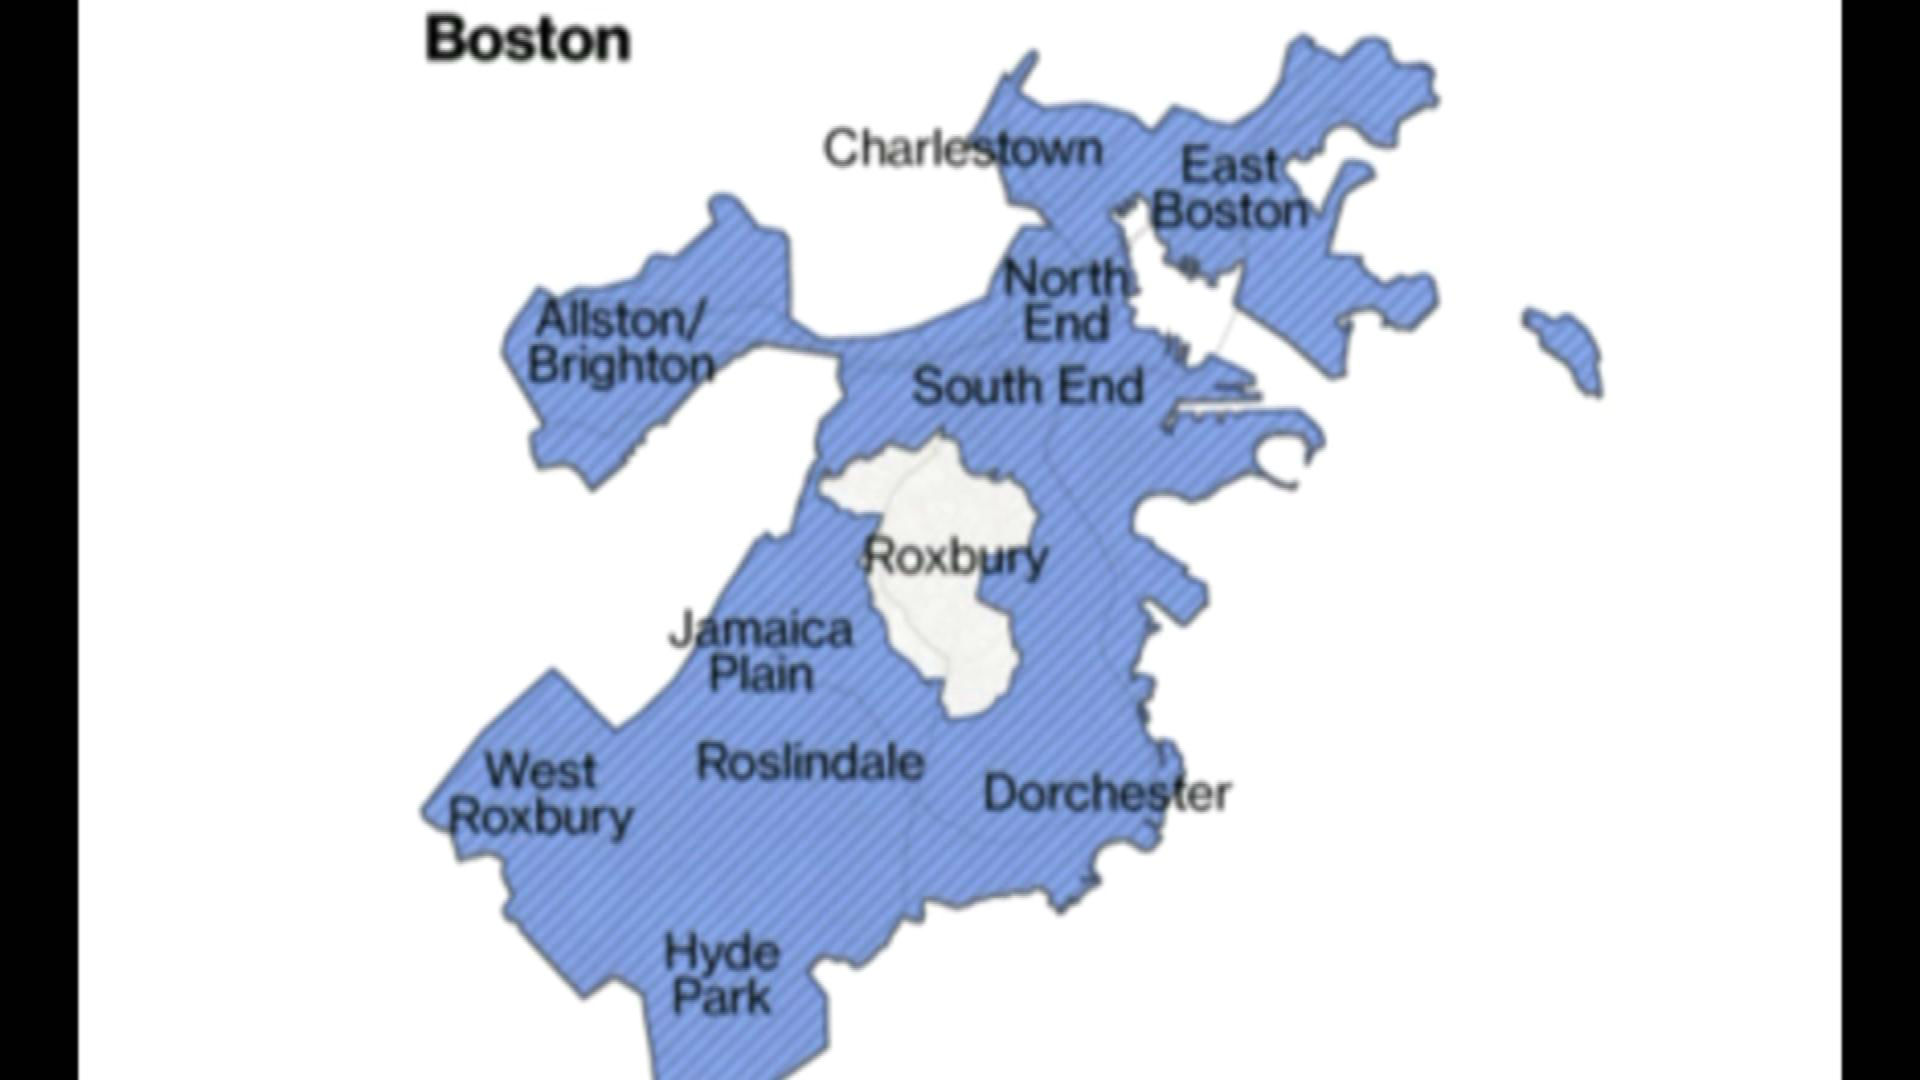 Amazon's same-day delivery service includes nearly all of Boston neighborhoods except Roxbury. (WBZ-TV)